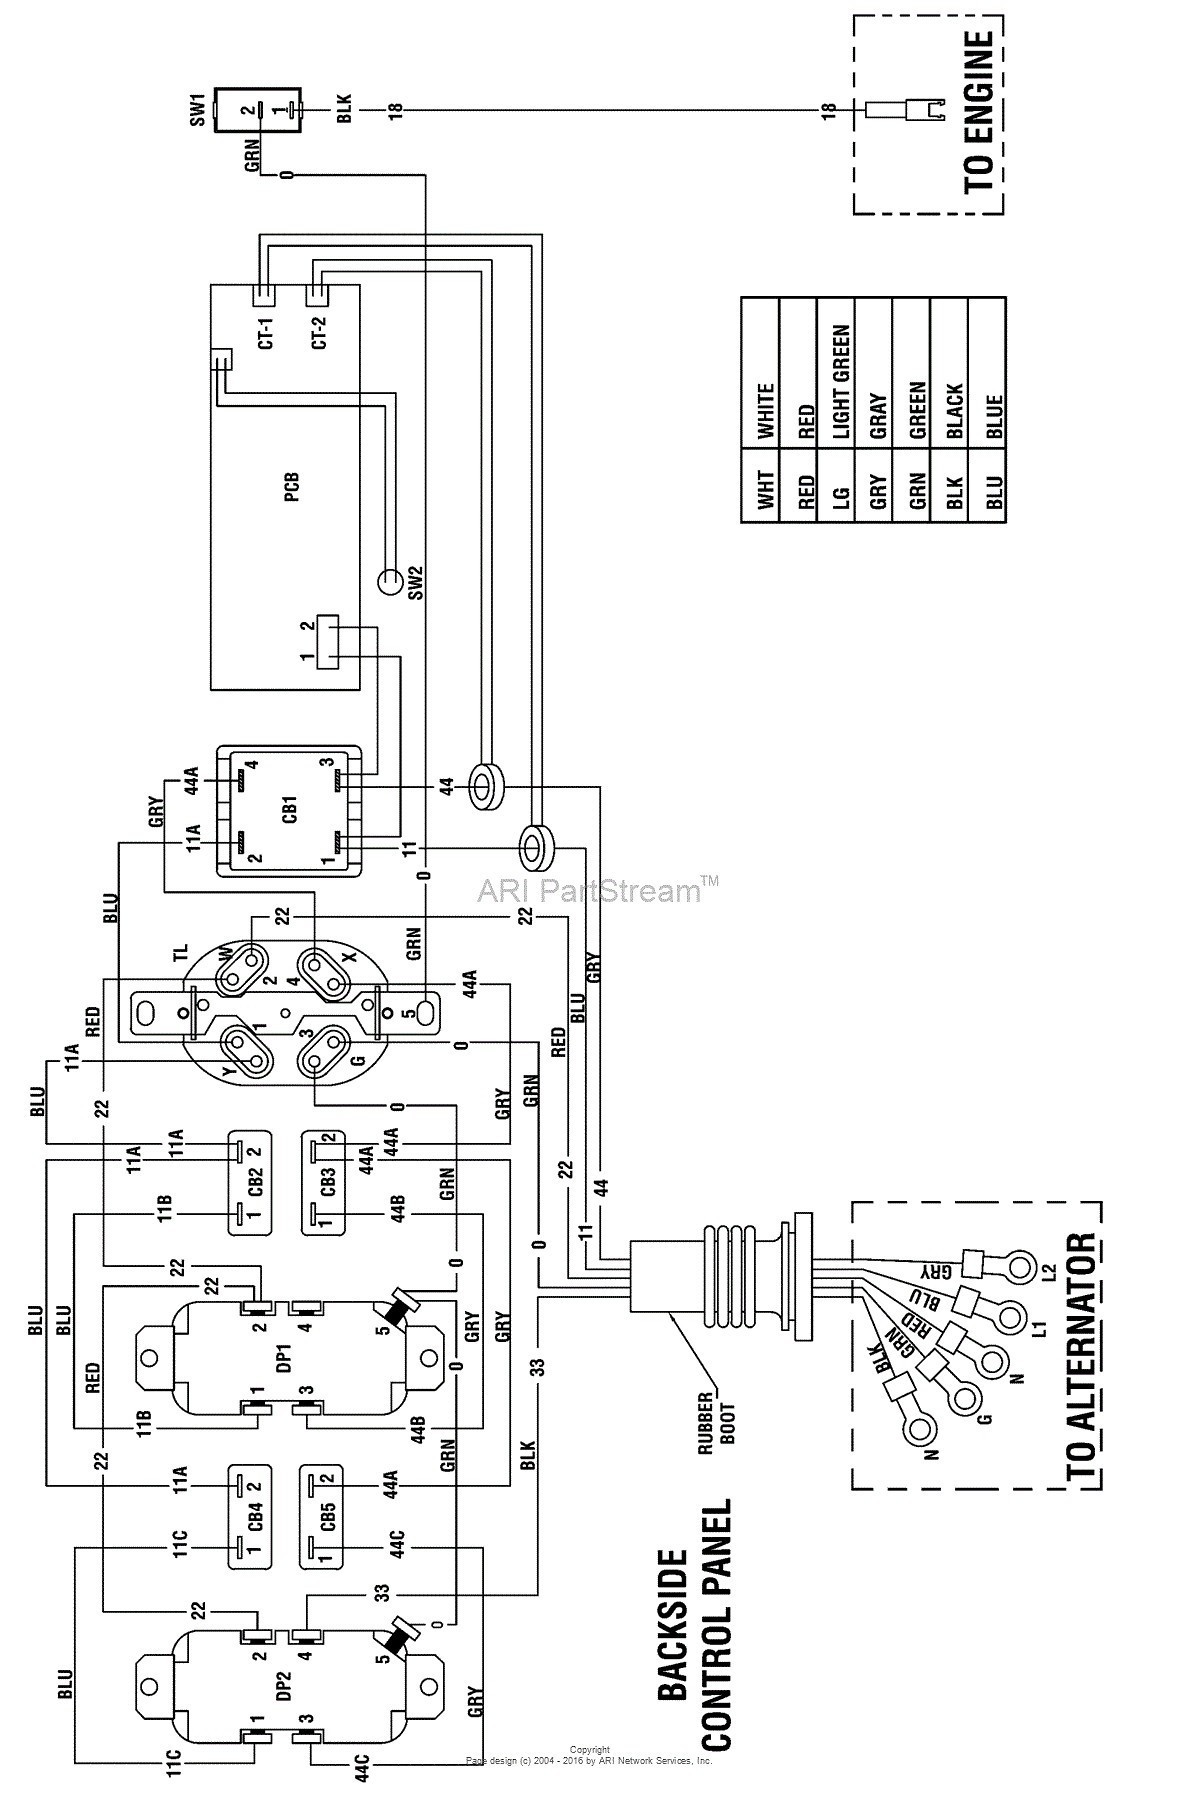 Wiring Diagram Briggs Stratton Engine Archives Gidn Co Best Incredible